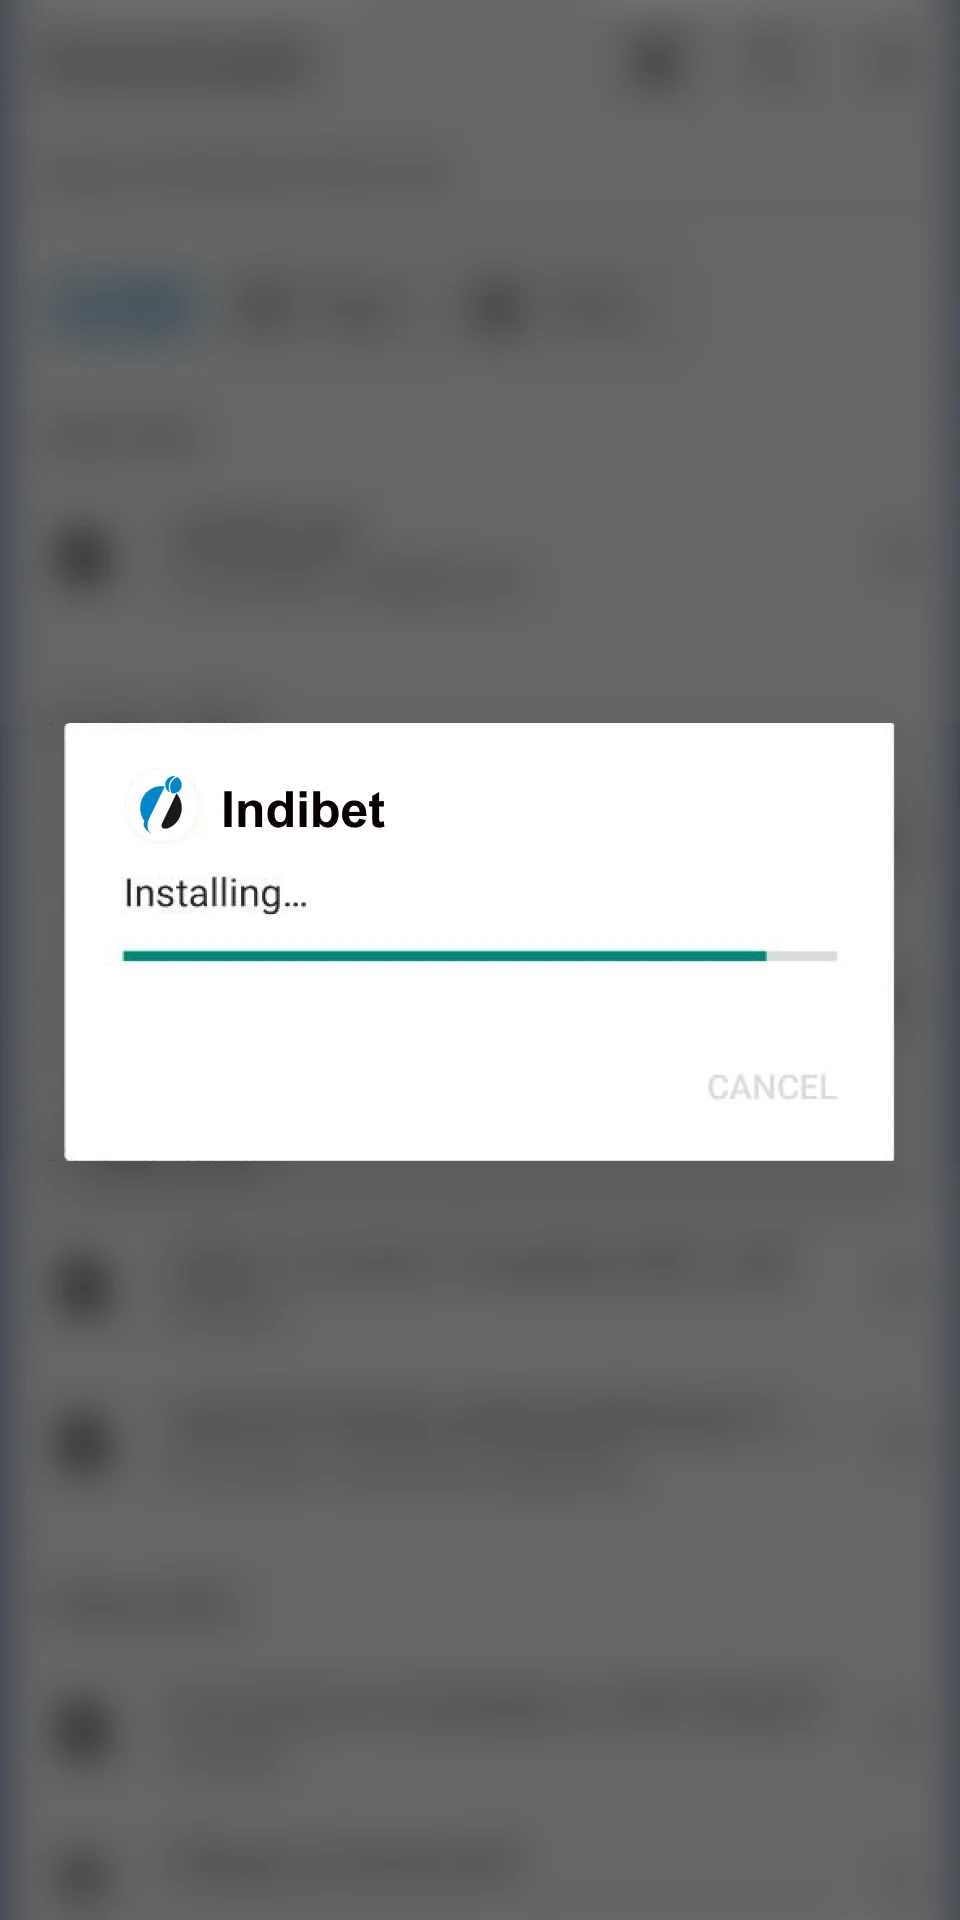 Install the Indibet app on your Android device.